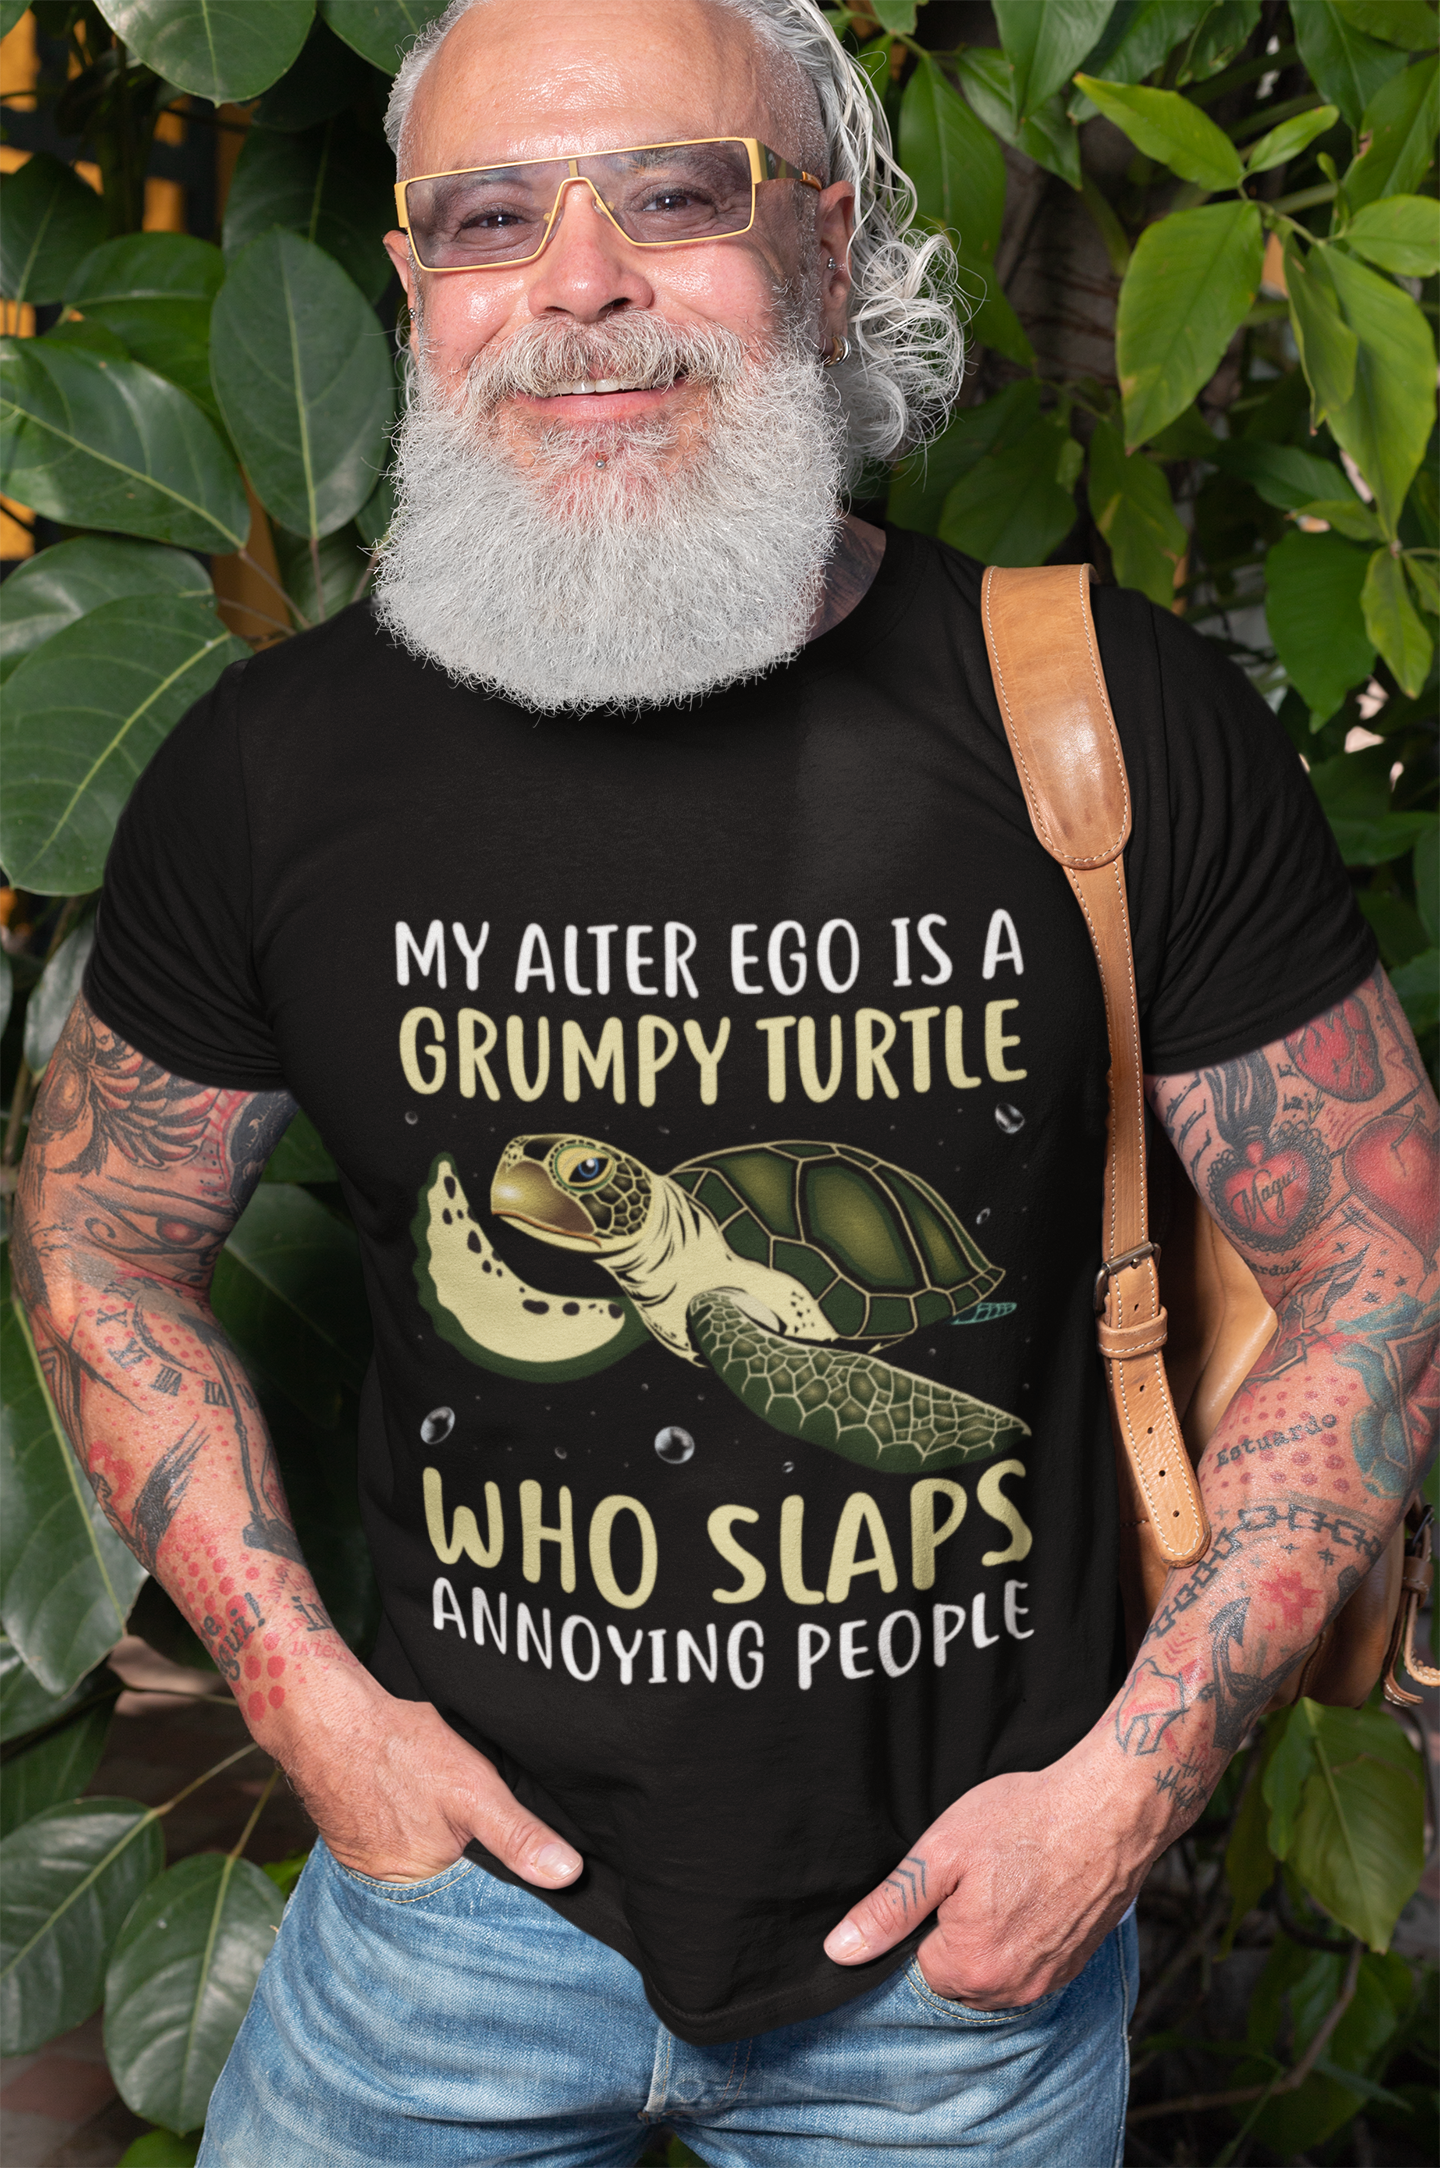 My alter ego is a grumpy turtle who slaps annoying people black tshirt worn by bearded man with glasses